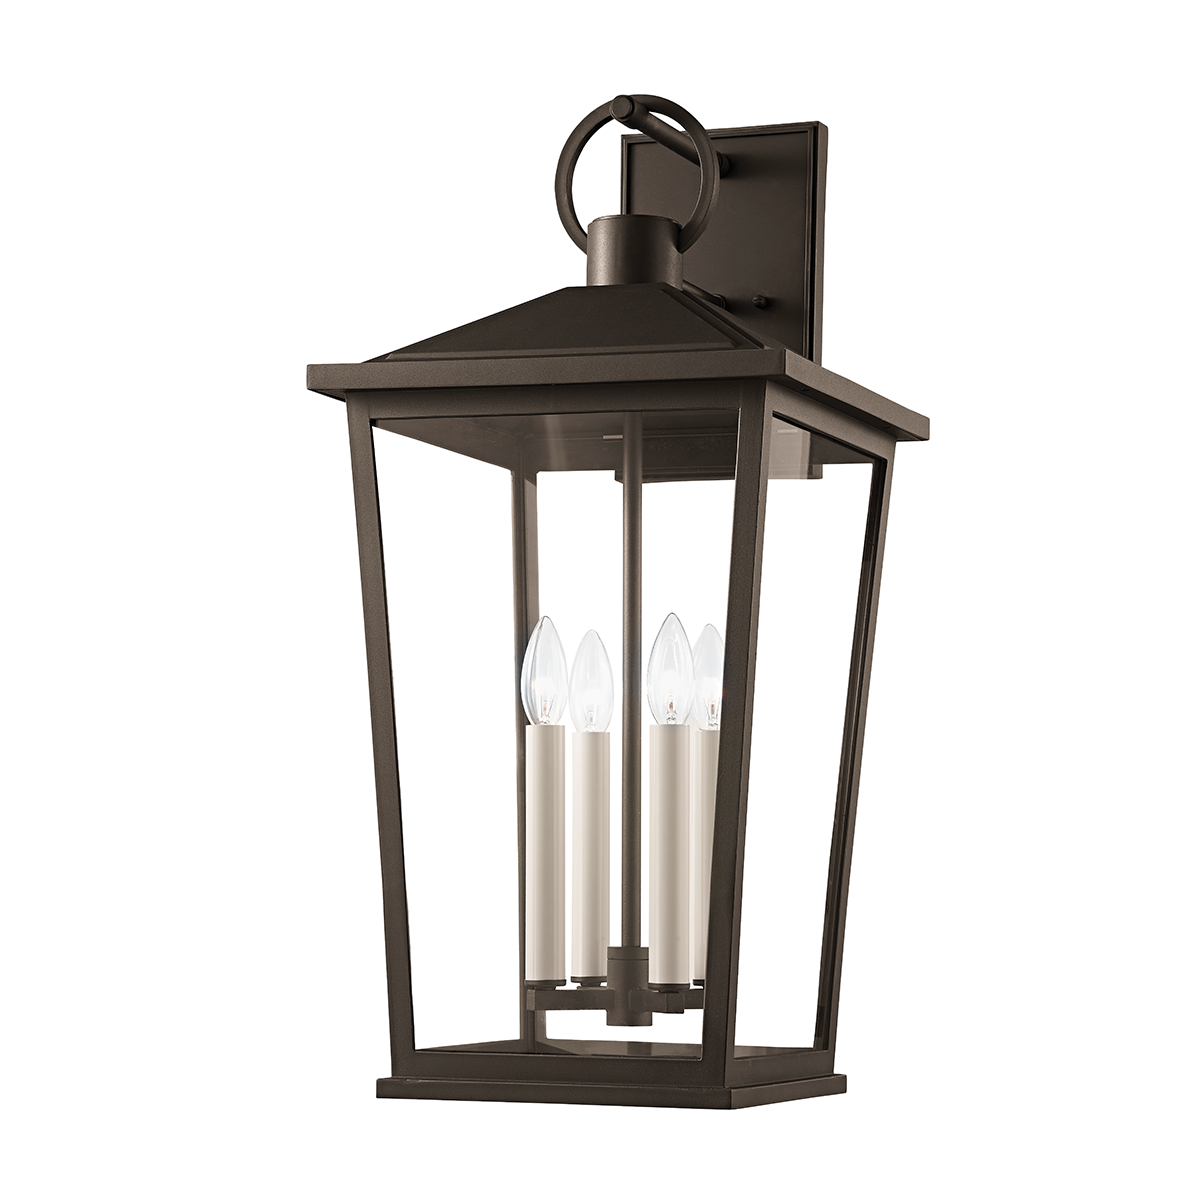 Troy SOREN 4 LIGHT EXTRA LARGE EXTERIOR WALL SCONCE B8904 Outdoor l Wall Troy Lighting TEXTURED BRONZE W/ HL  